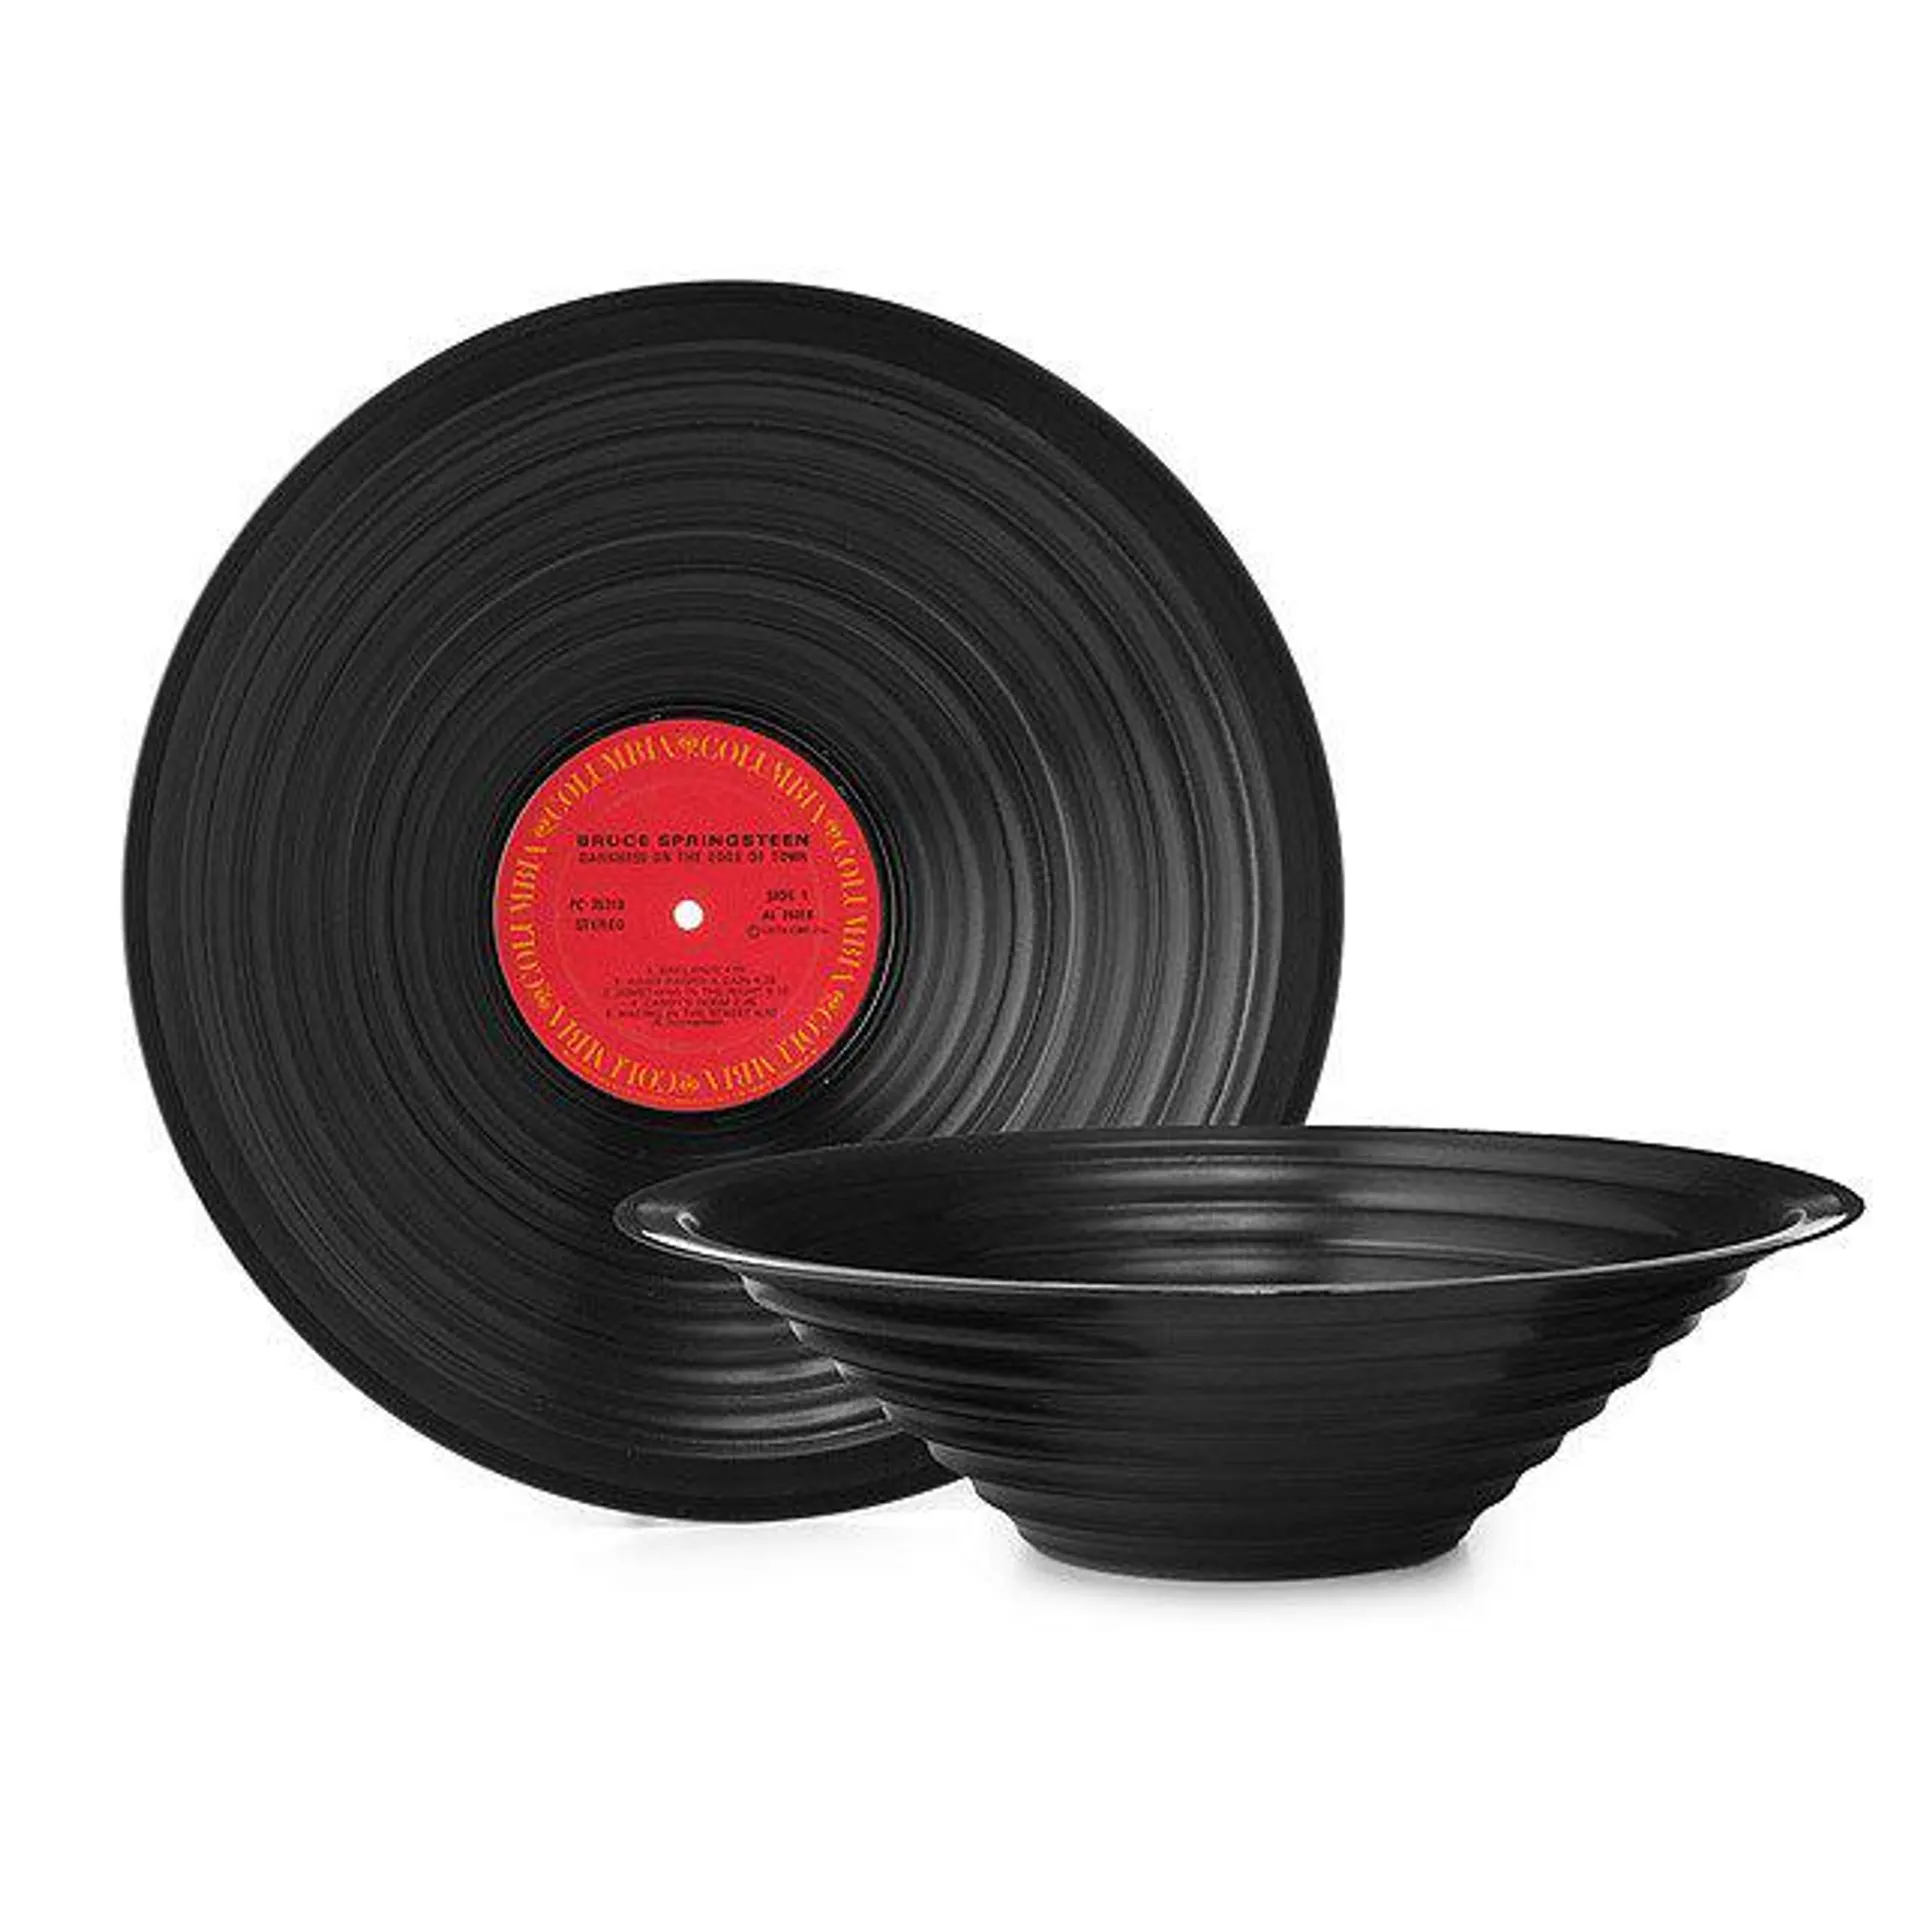 Rock and Roll Record Bowl